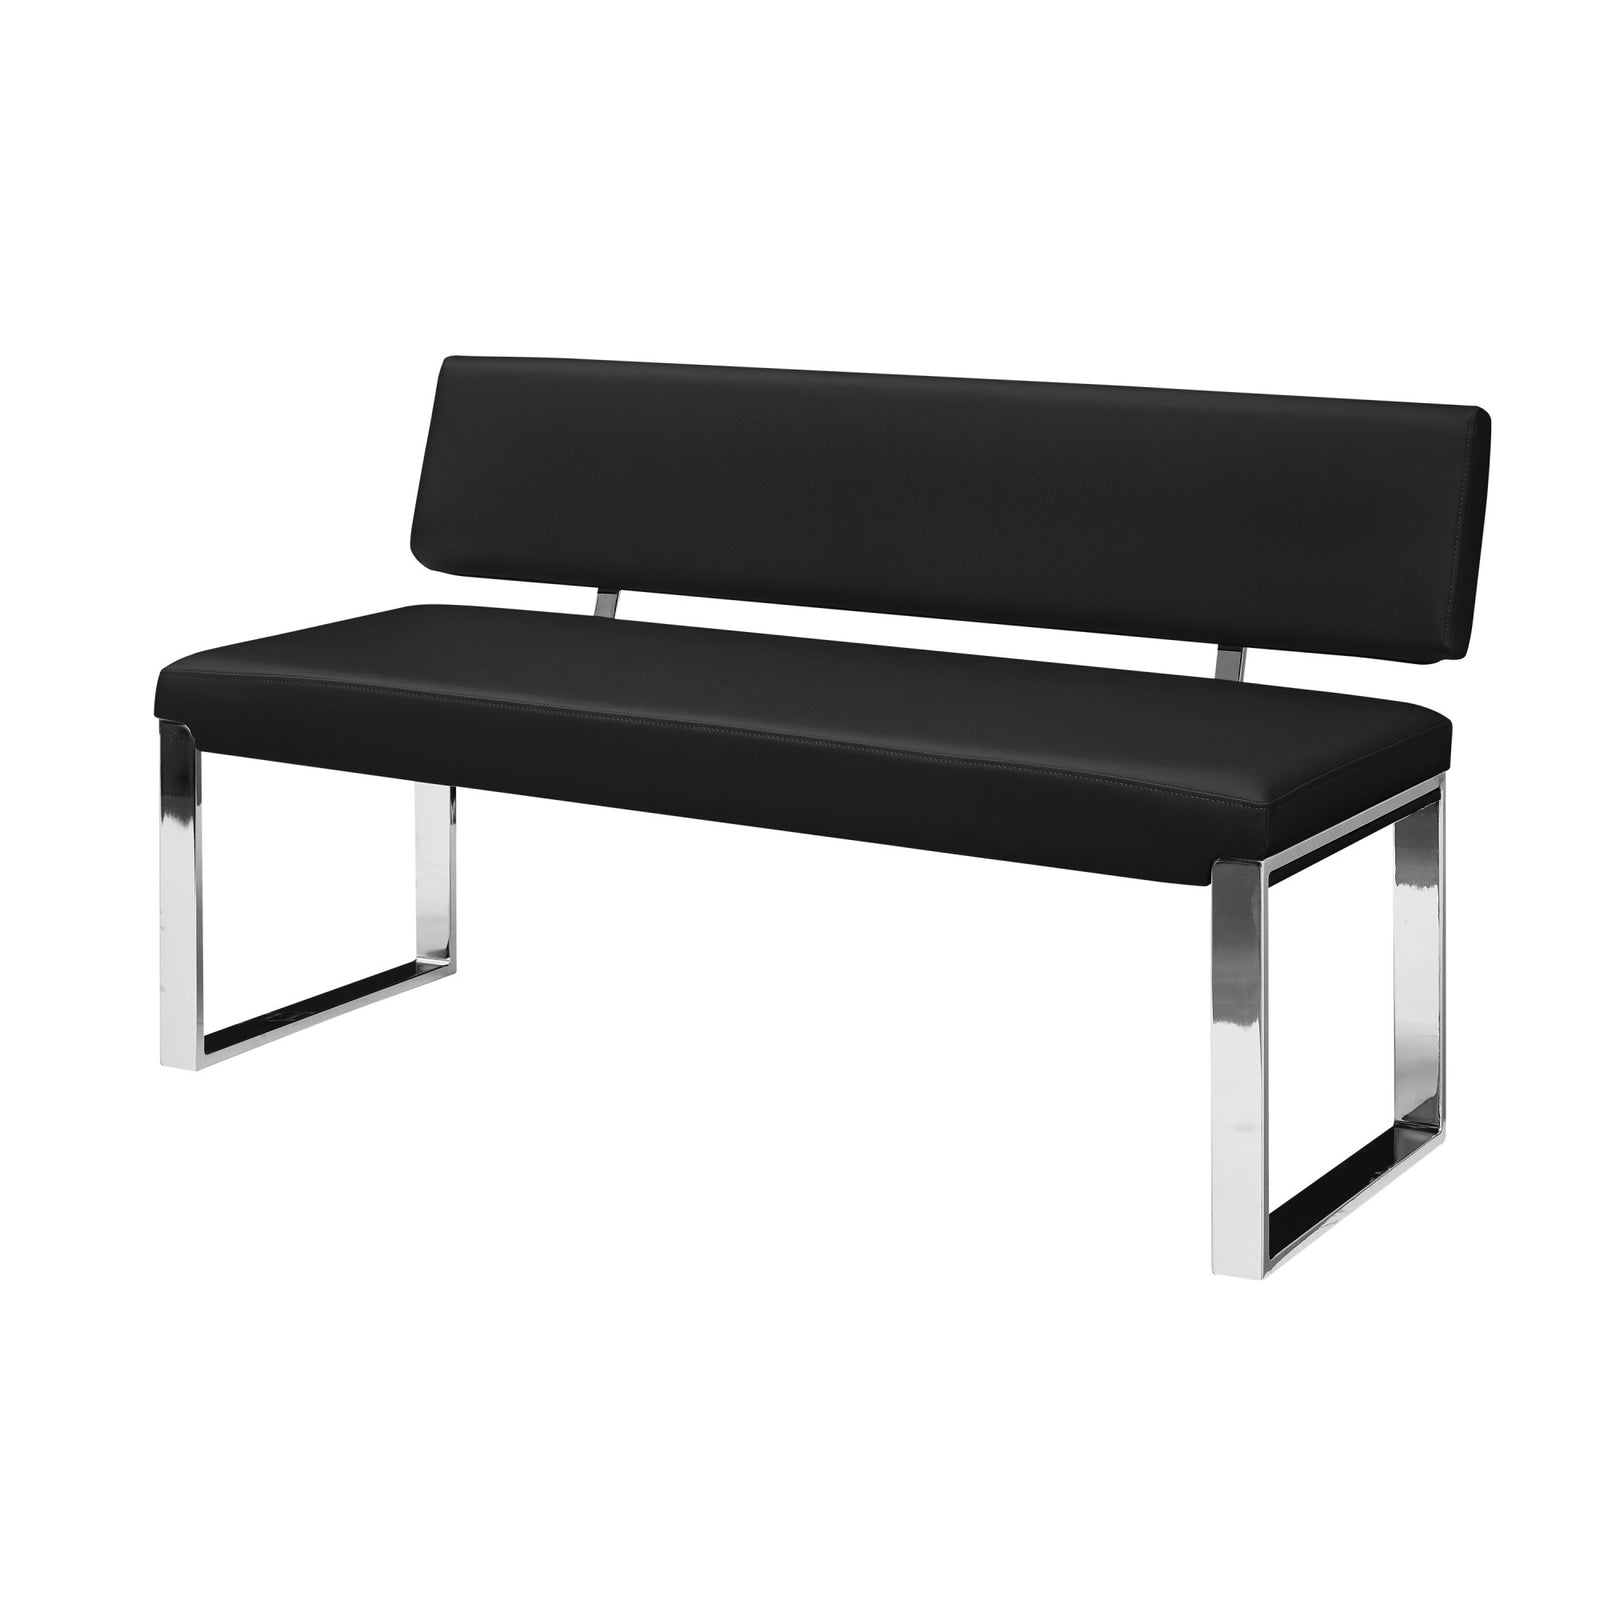 50" Black And Silver Upholstered Faux Leather Bench